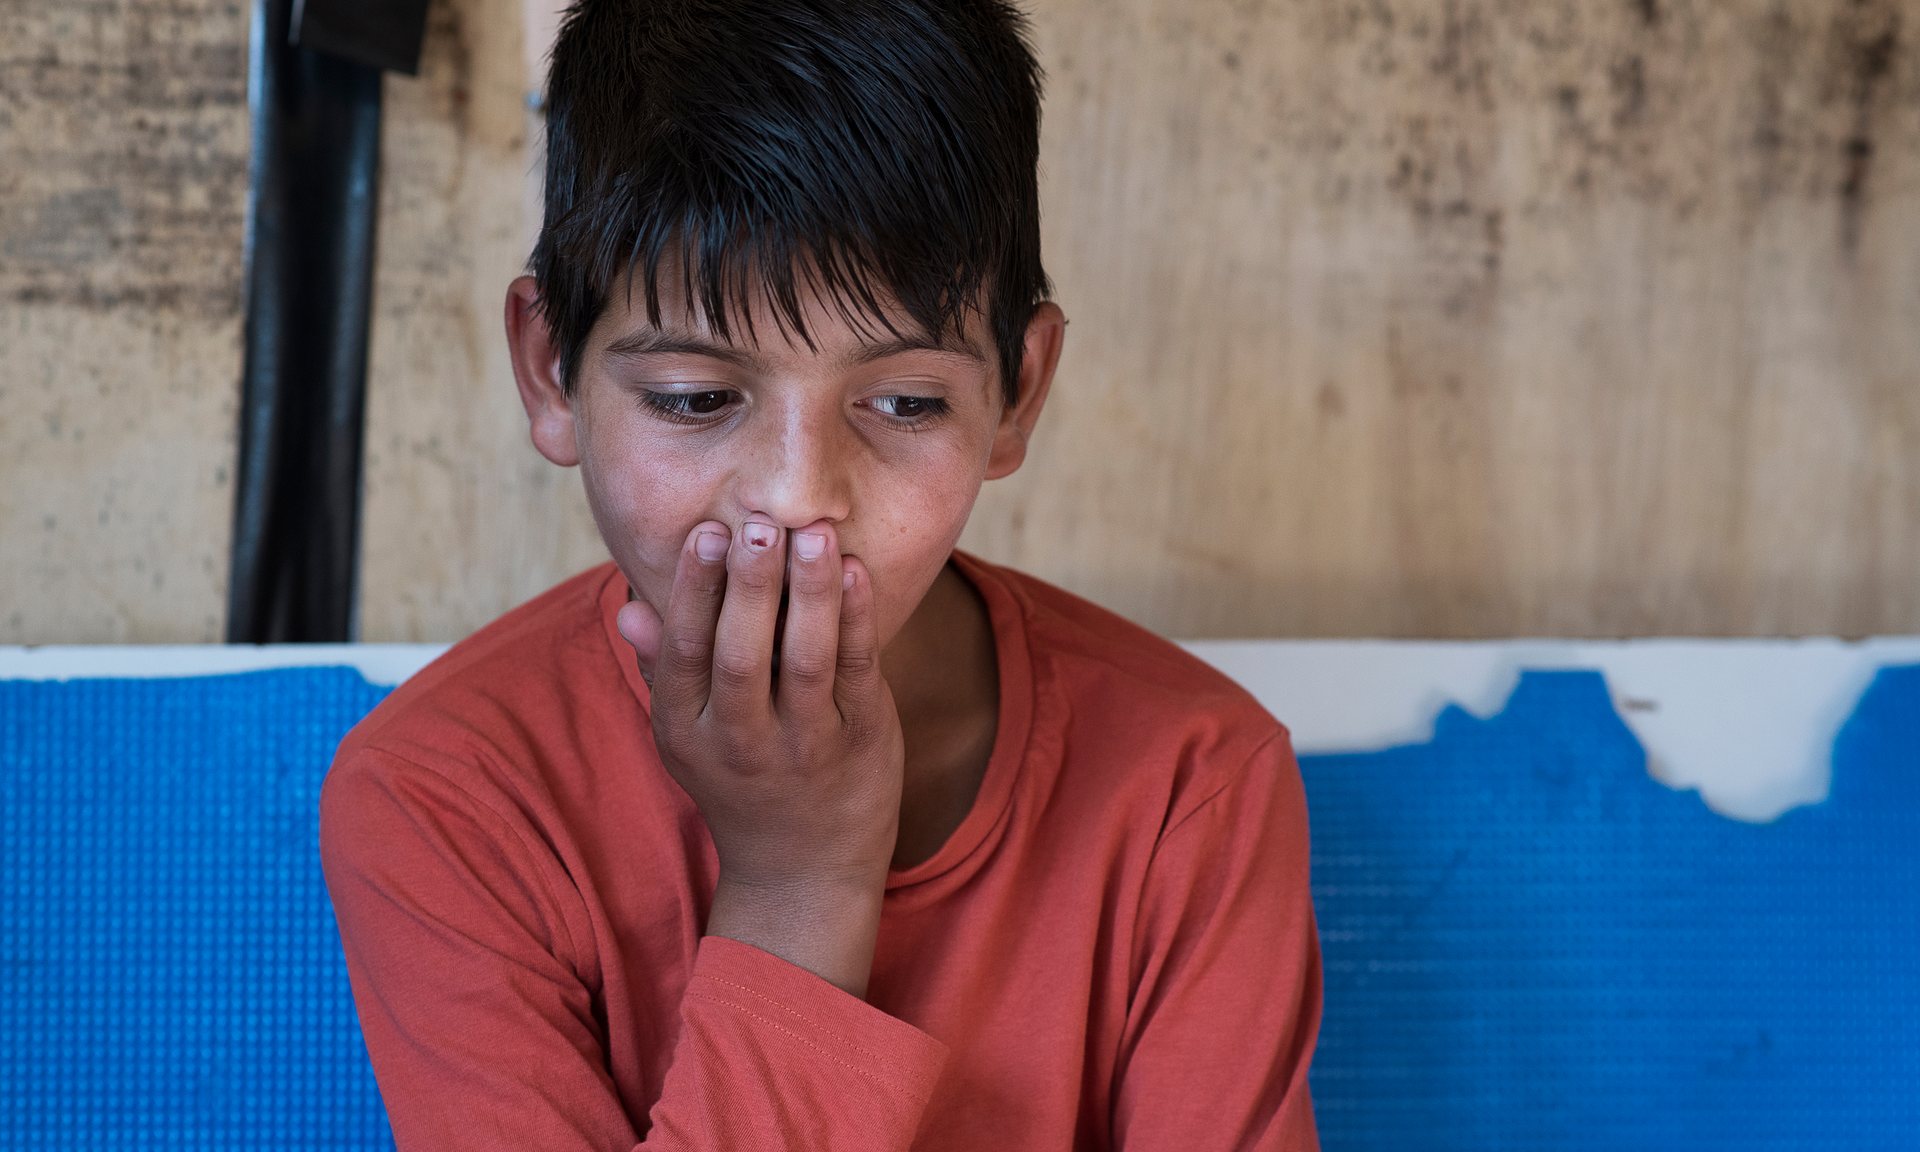 Abdul, 10, lives on his own in Calais, where he looks after his nine-year-old nephew as they try to get to the UK. Photograph: Alecsandra Raluca Drăgoi for the Guardian